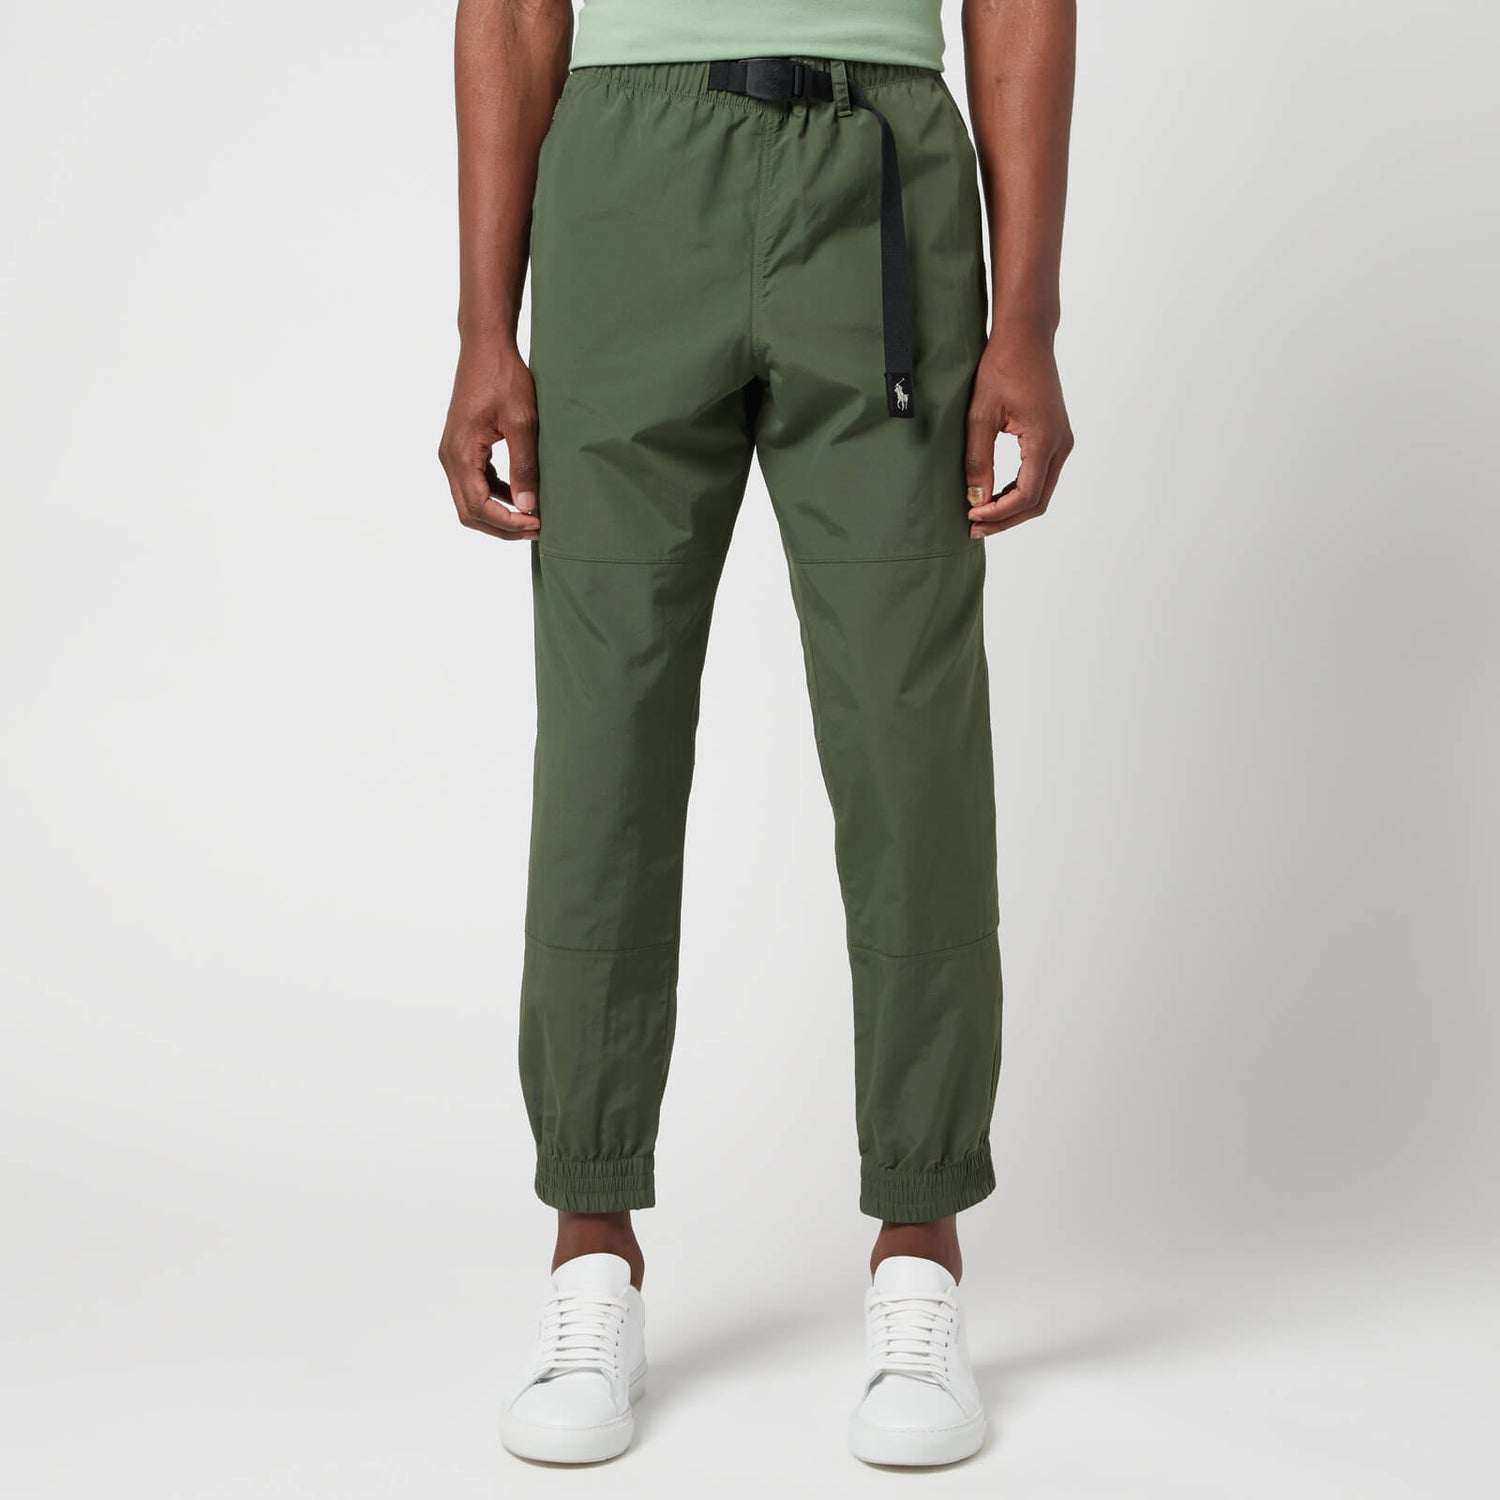 Polo Ralph Lauren Men's Tapered Hiking Trousers - Army - S